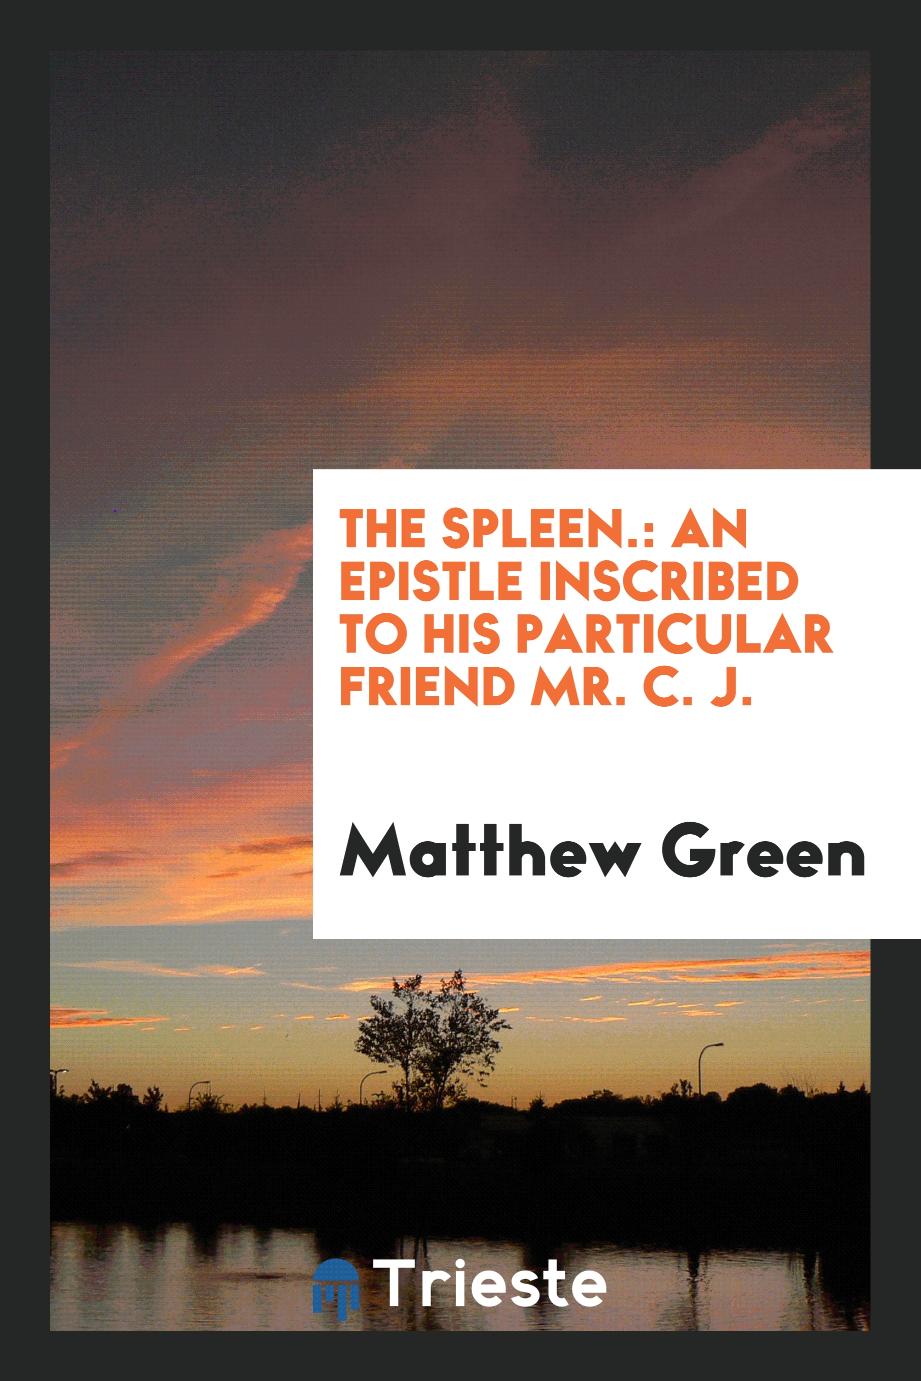 The Spleen.: An Epistle Inscribed to His Particular Friend Mr. C. J.